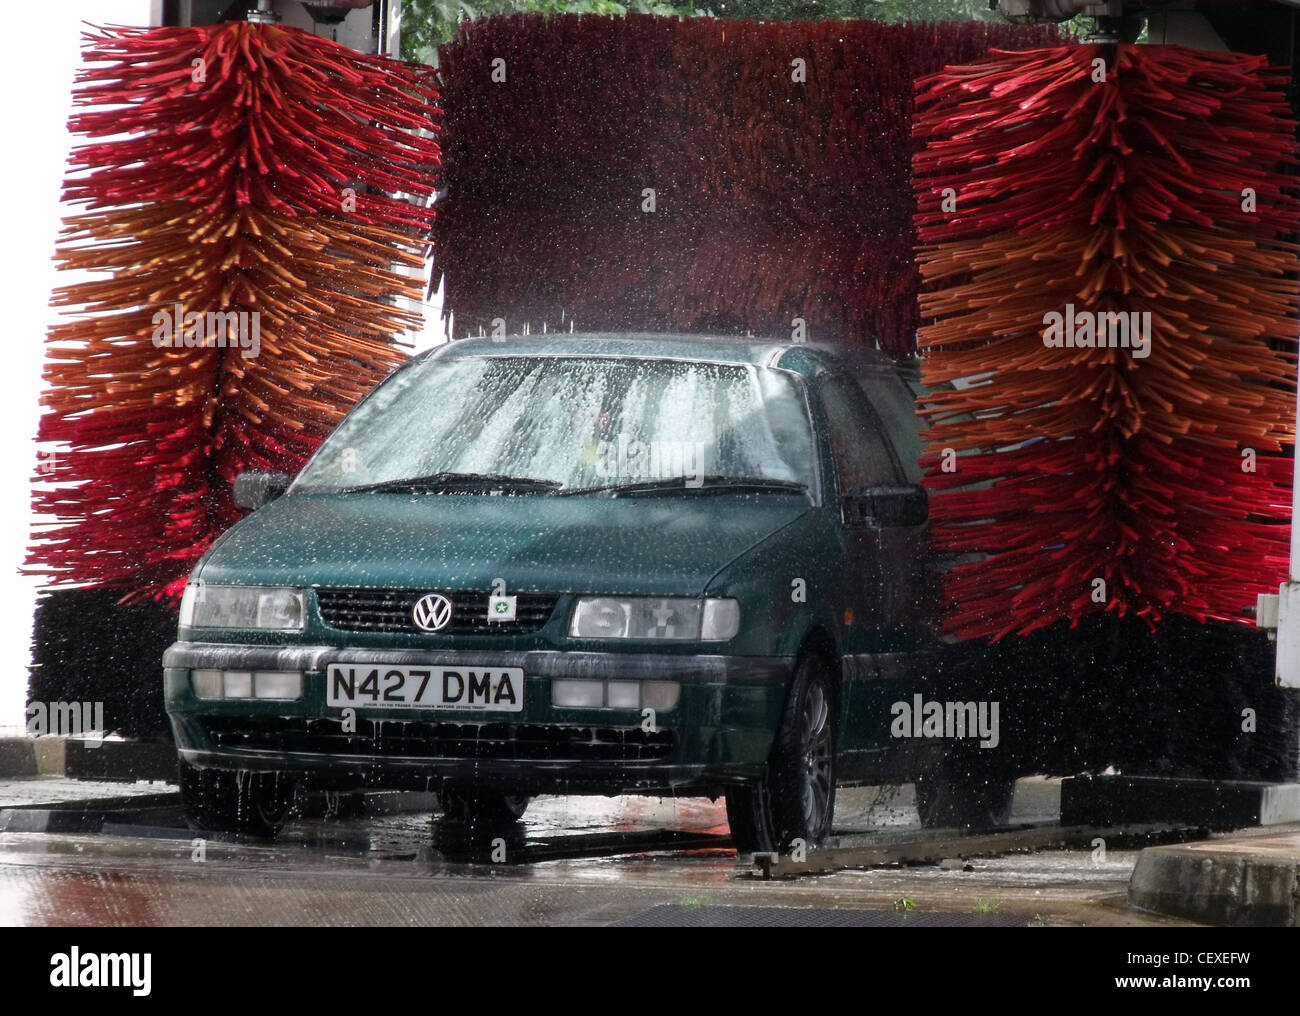 Old Volkswagen golf, being washed In the service station automated car wash Stock Photo